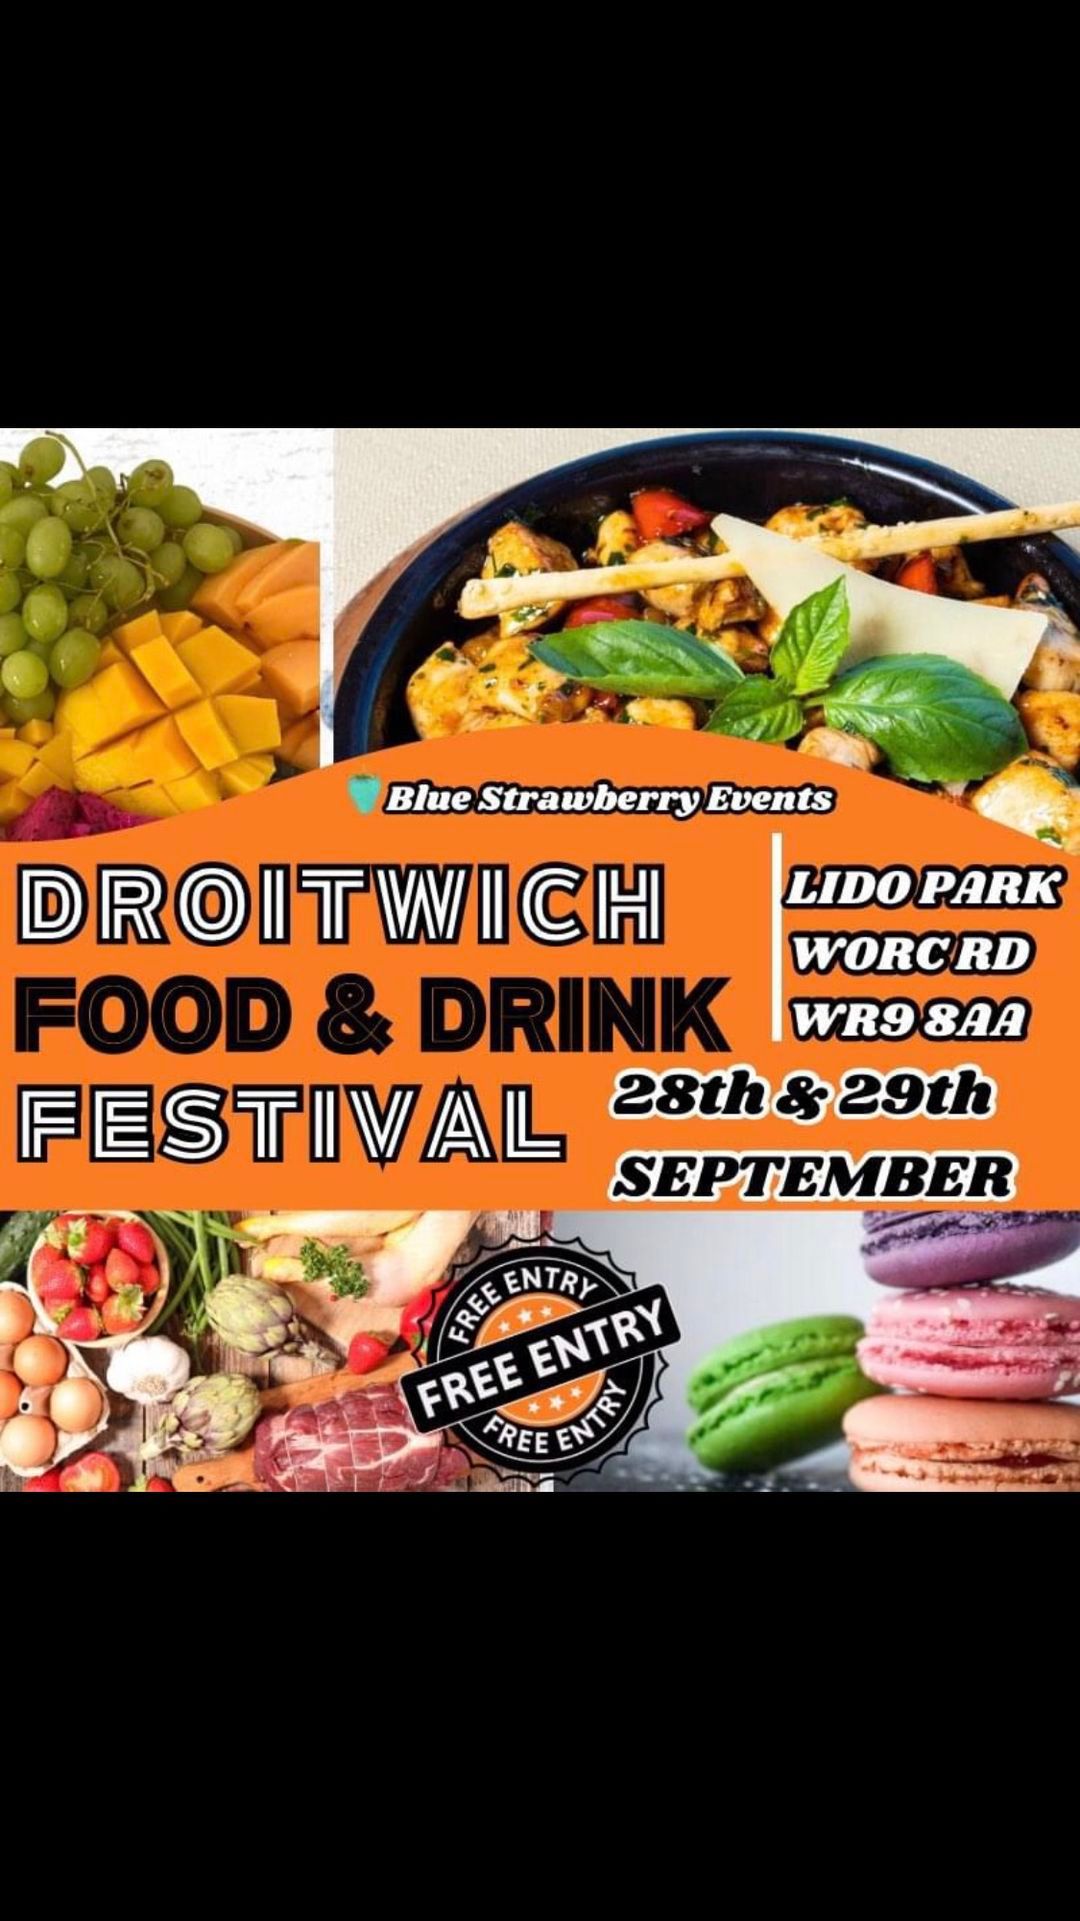 DROITWICH AUTUMN FOOD & DRINK FESTIVAL FREE ENTRY Artisan Food Festival Plus Tribute Music!  